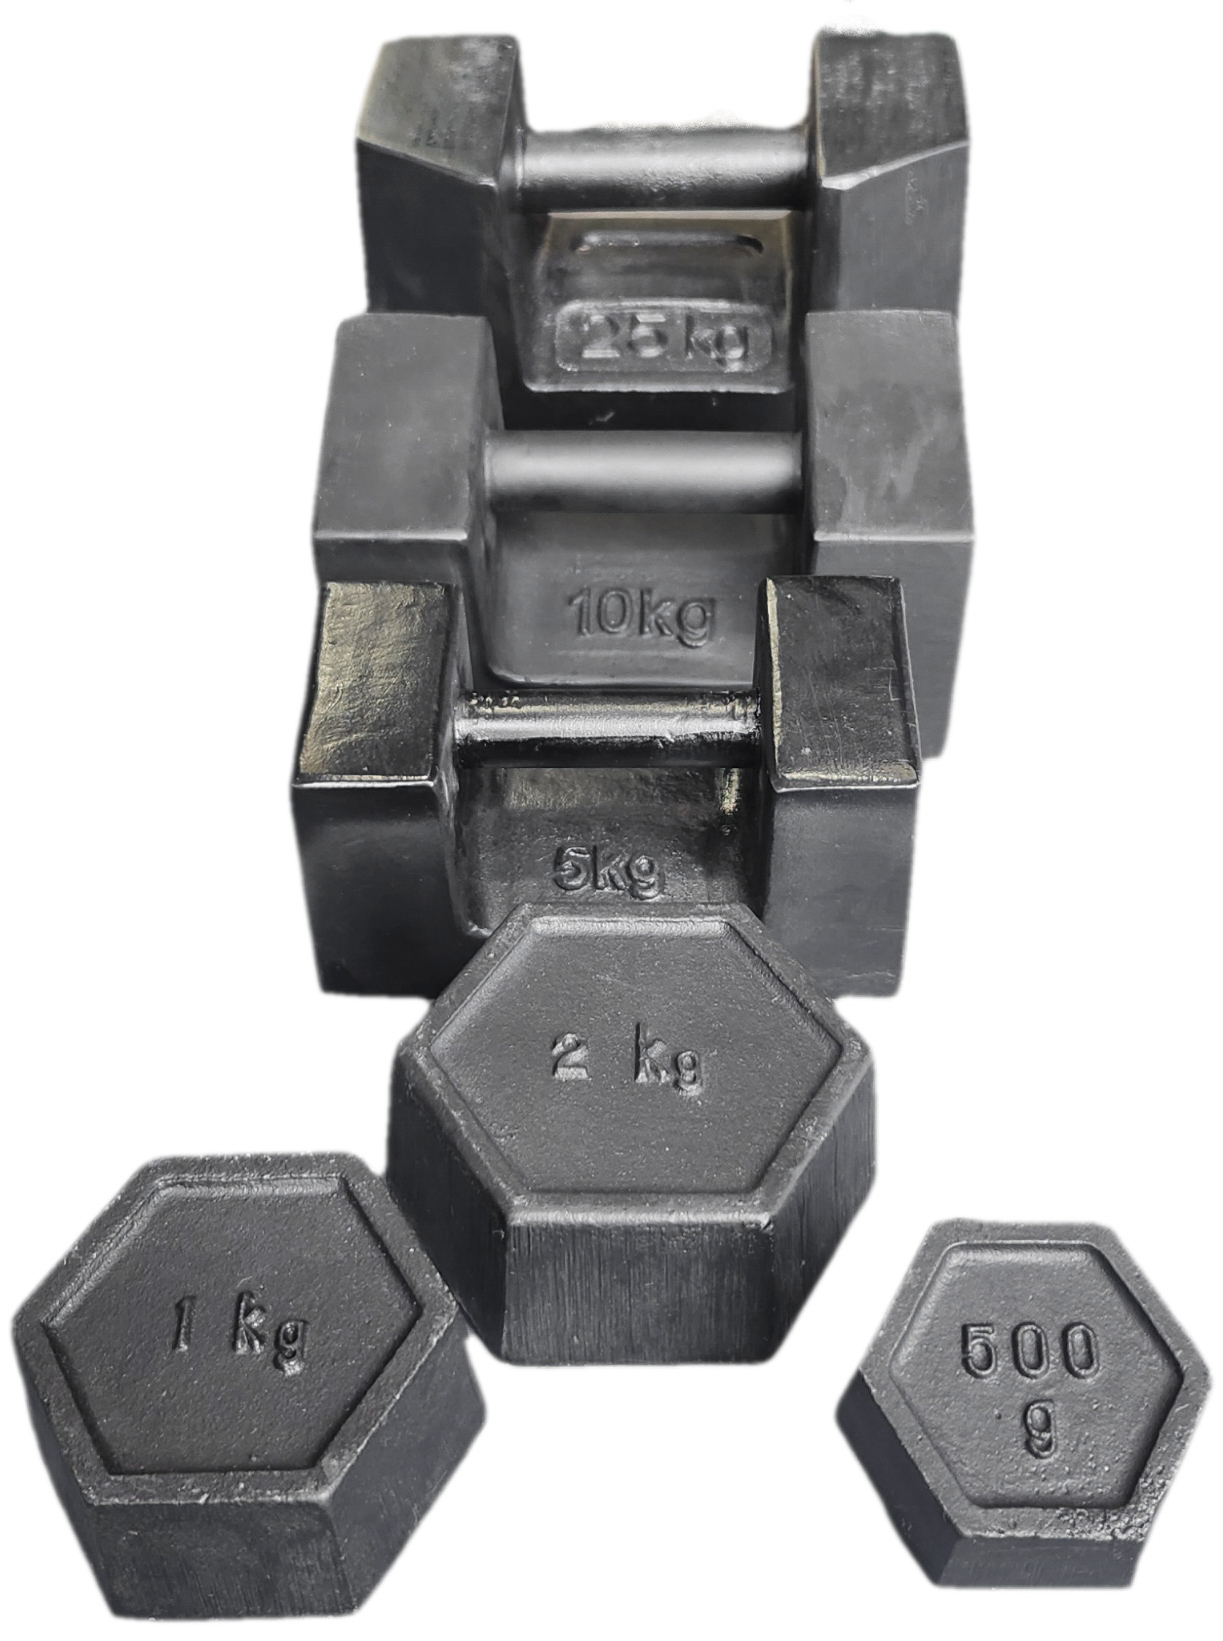 M1 Cast Iron Calibration / Testing Weights